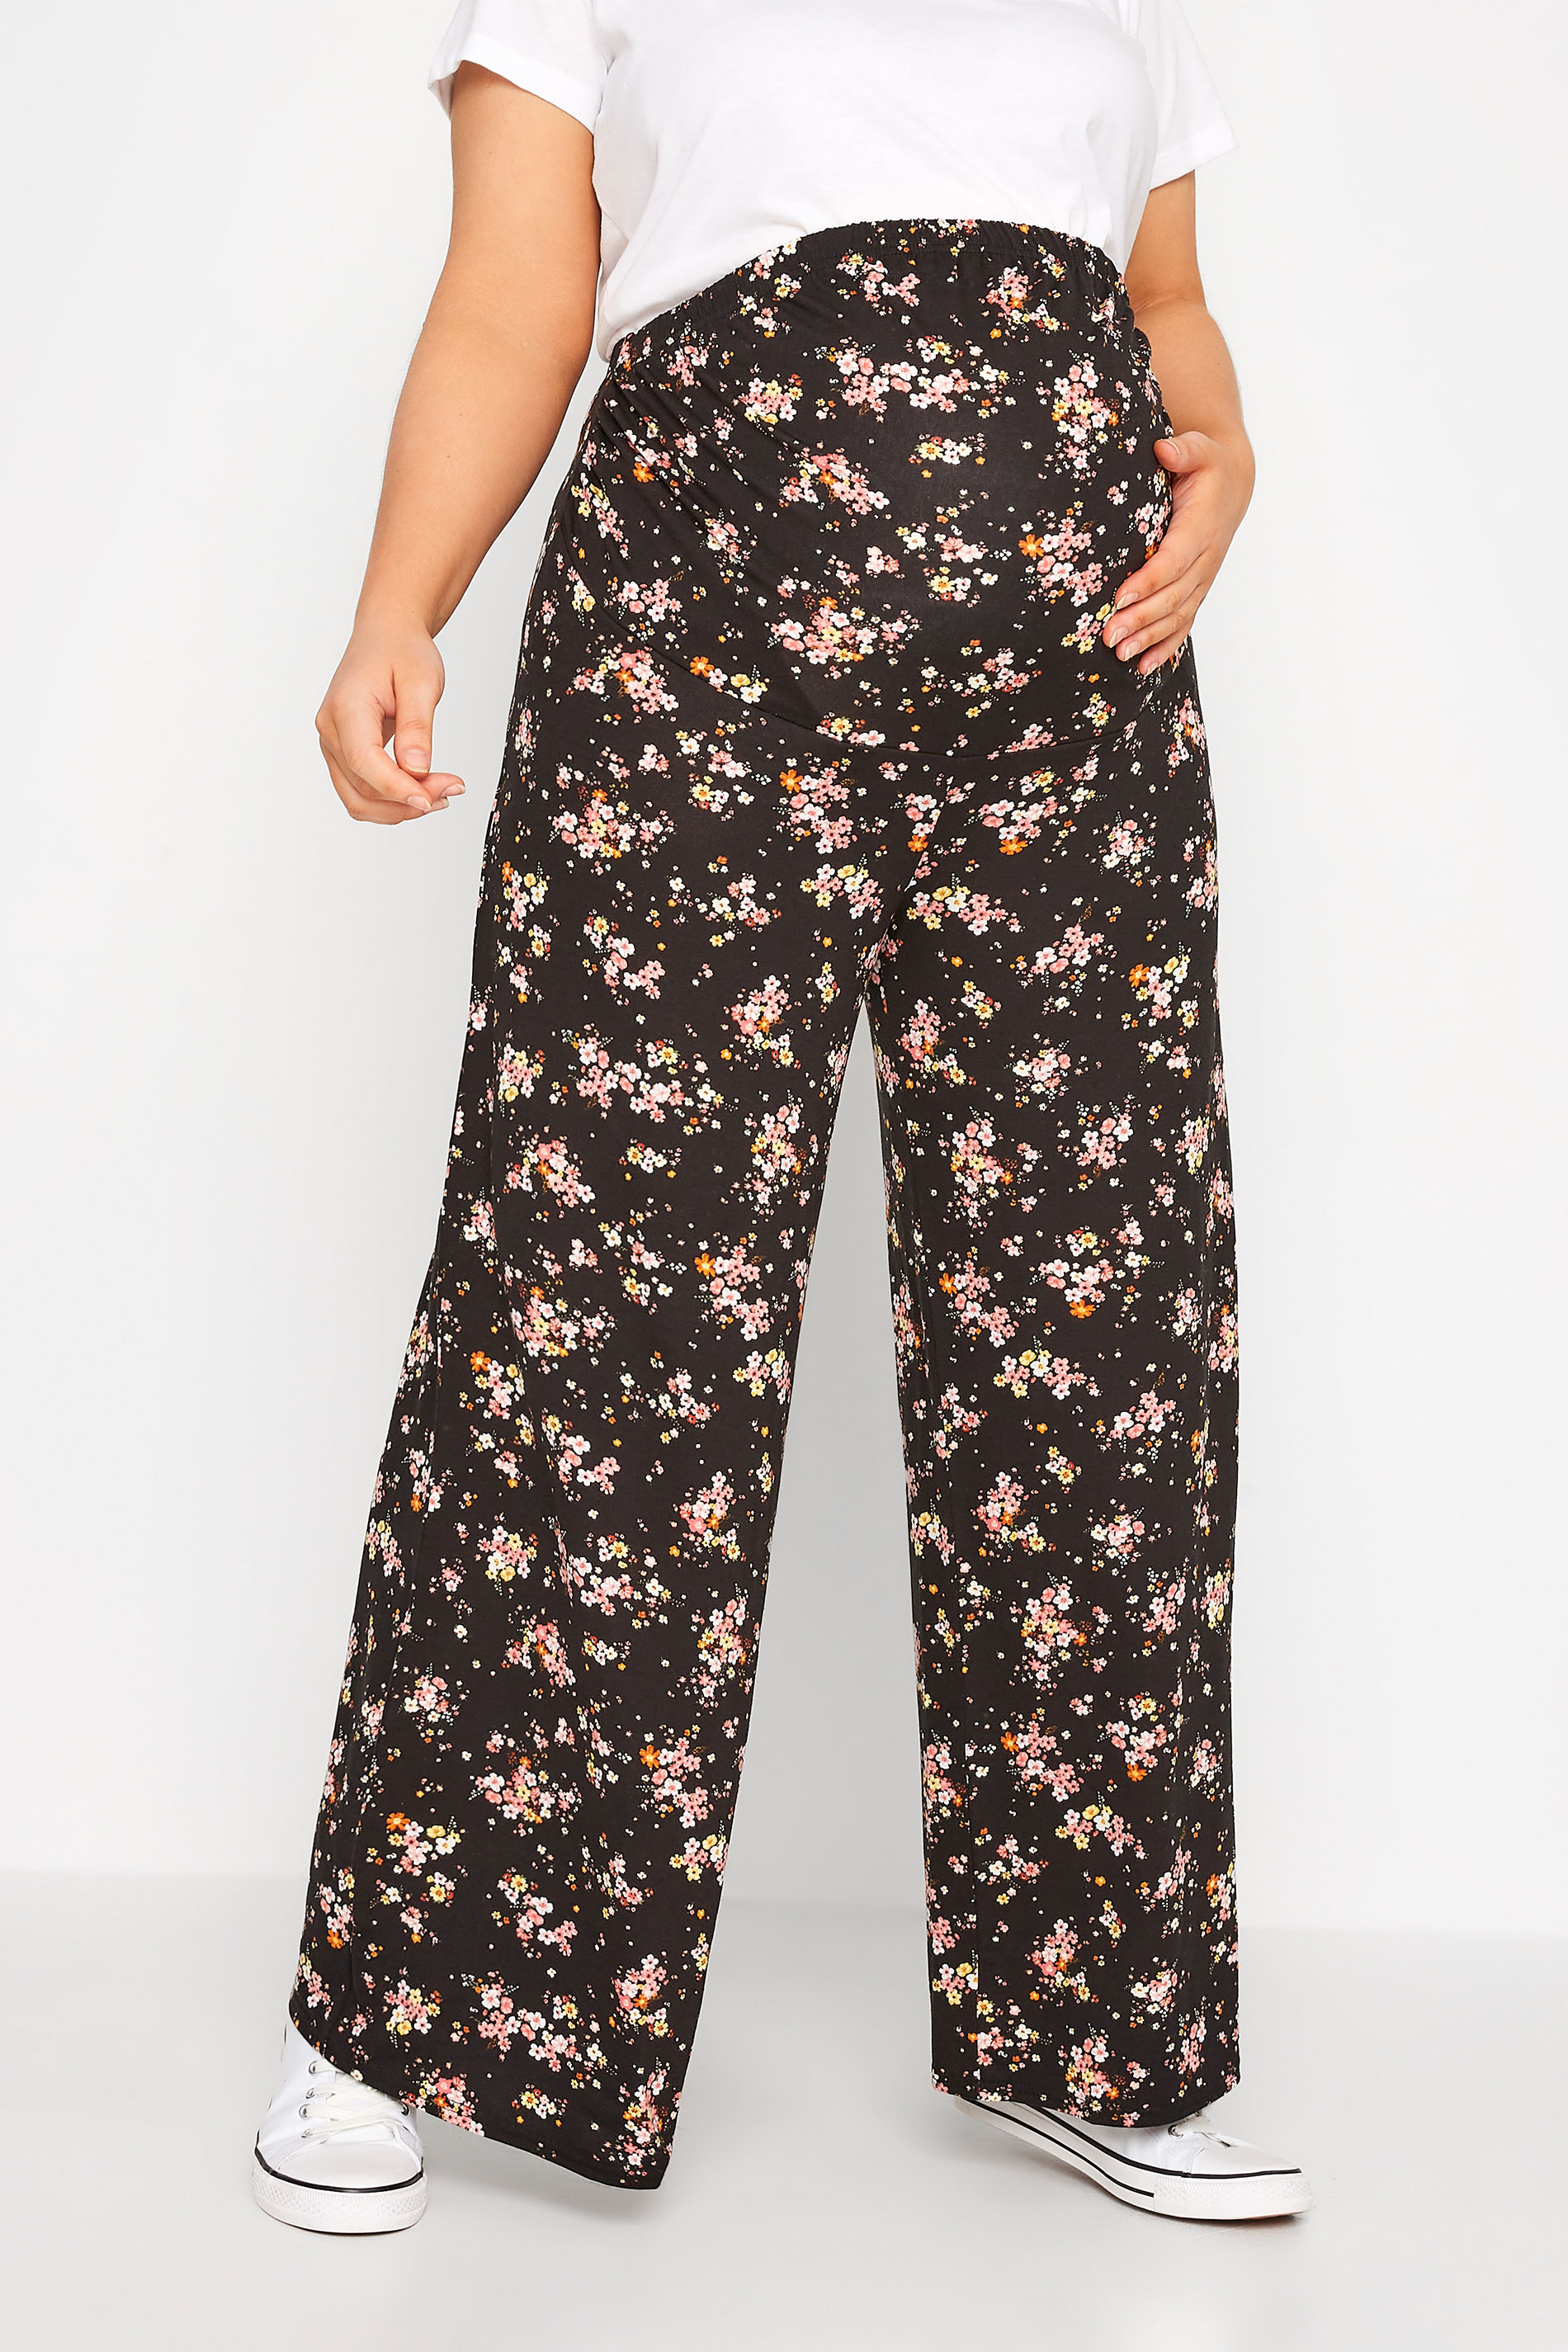 BUMP IT UP MATERNITY Plus Size Black Floral Print Wide Leg Trousers | Yours Clothing 1